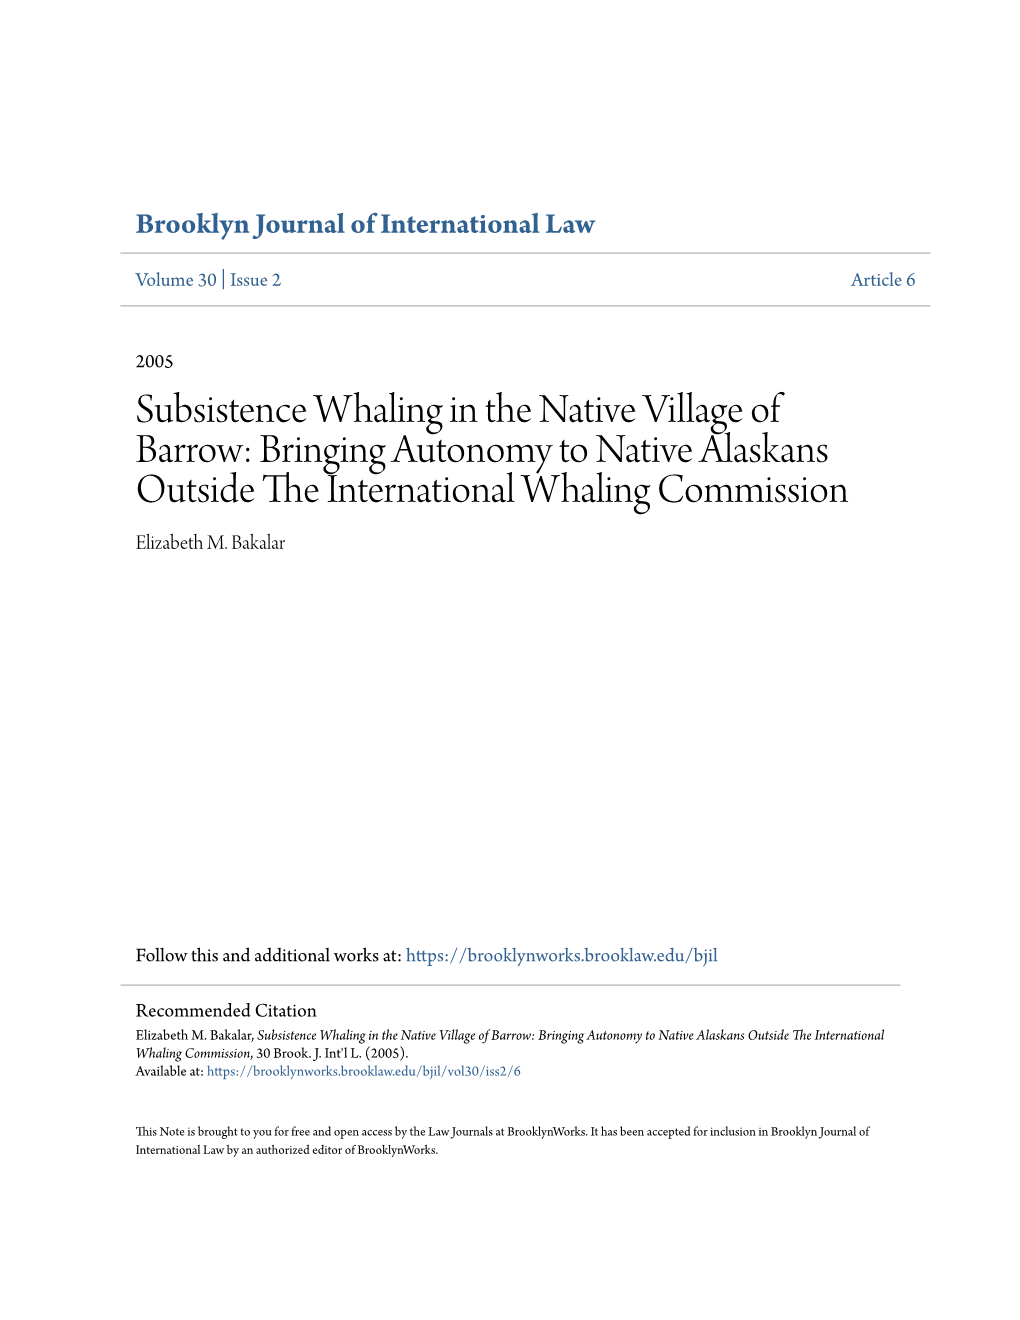 Subsistence Whaling in the Native Village of Barrow: Bringing Autonomy to Native Alaskans Outside the Ni Ternational Whaling Commission Elizabeth M